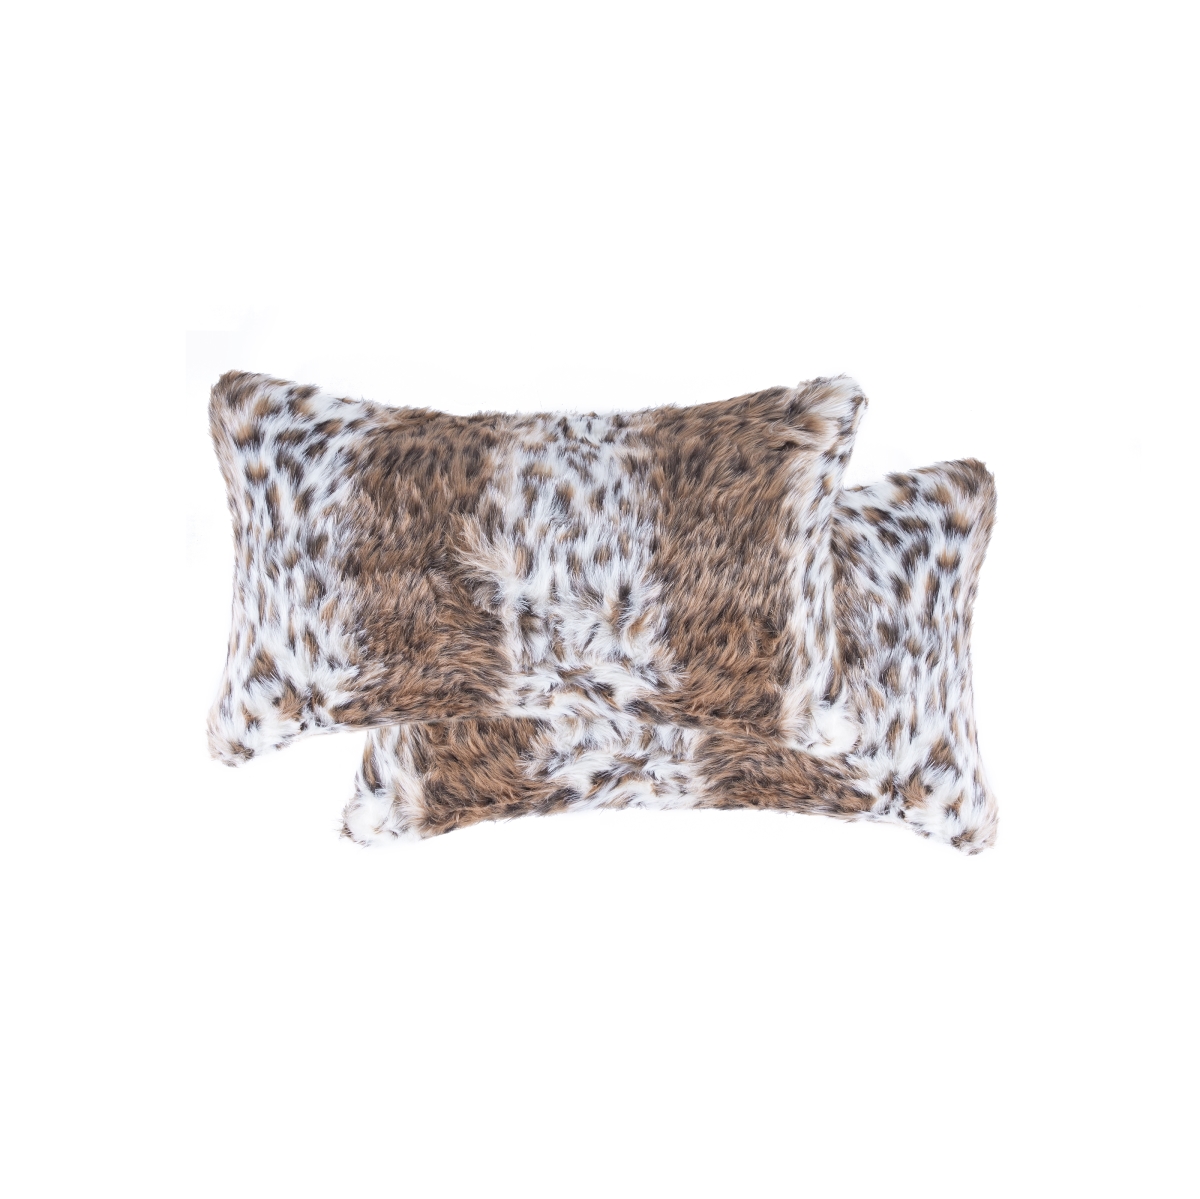 676685048660 12 X 20 In. Belton Linear Pillow - George Town Lynx - Pack Of 2